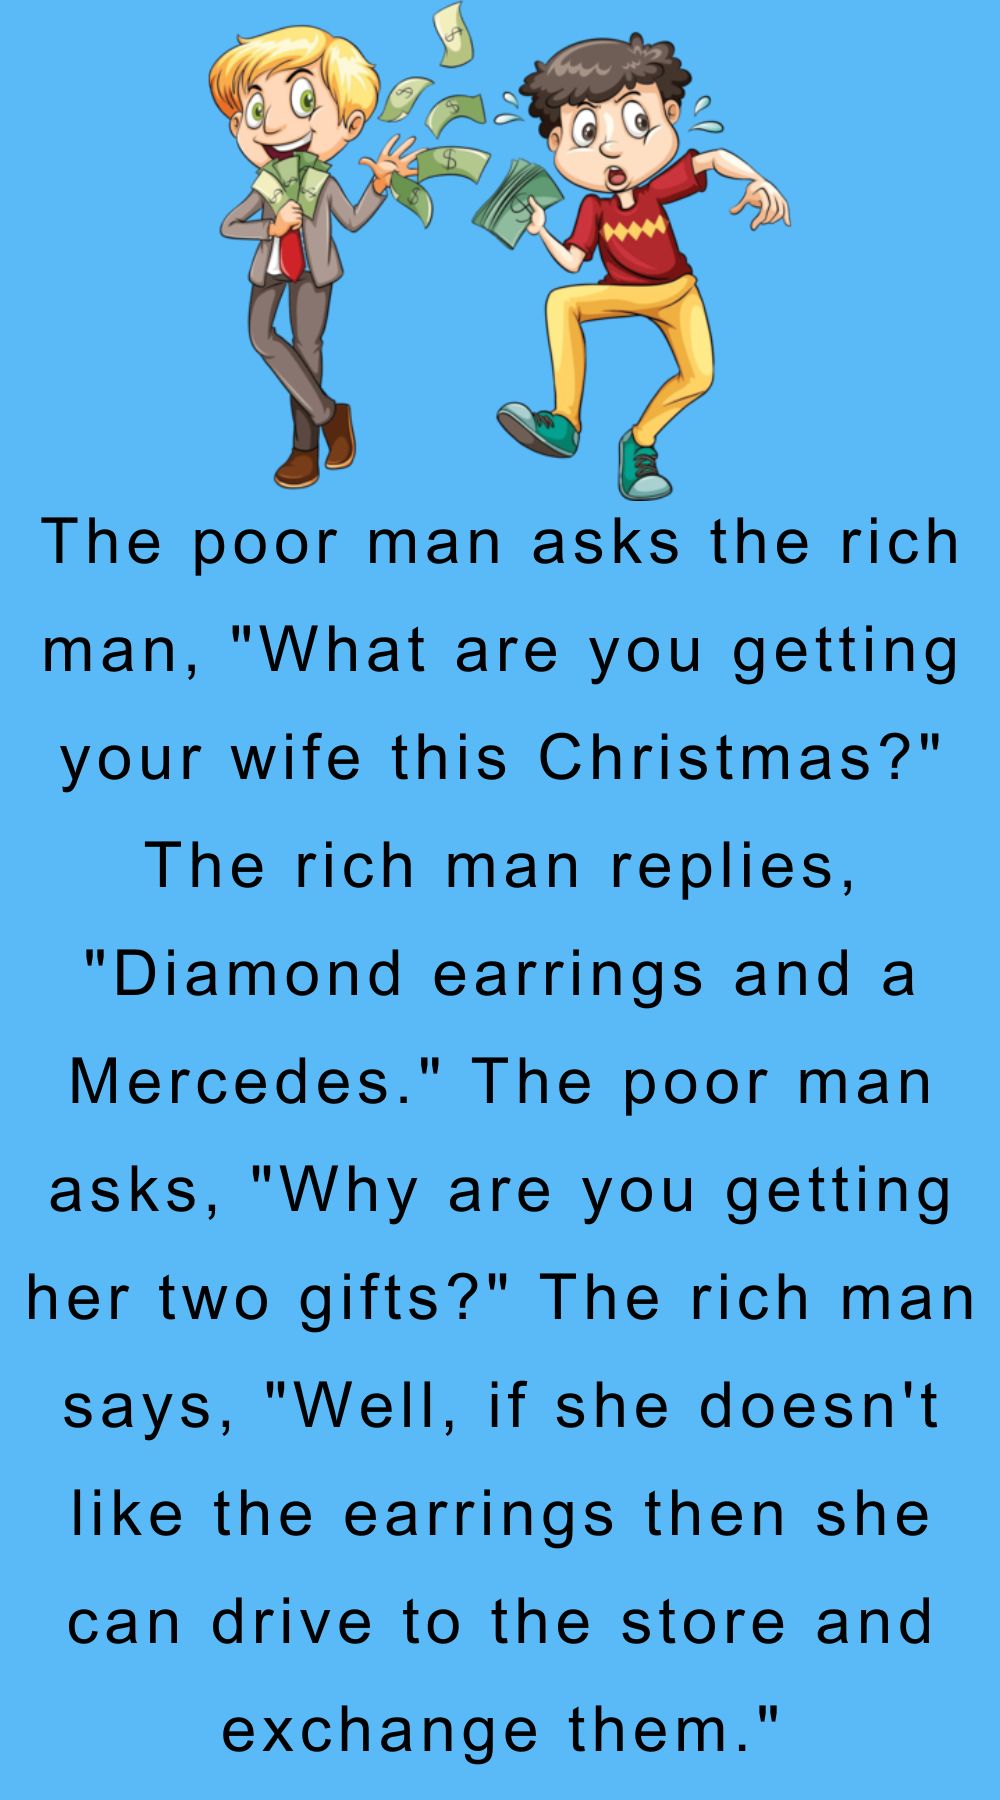 The poor man asks the rich man